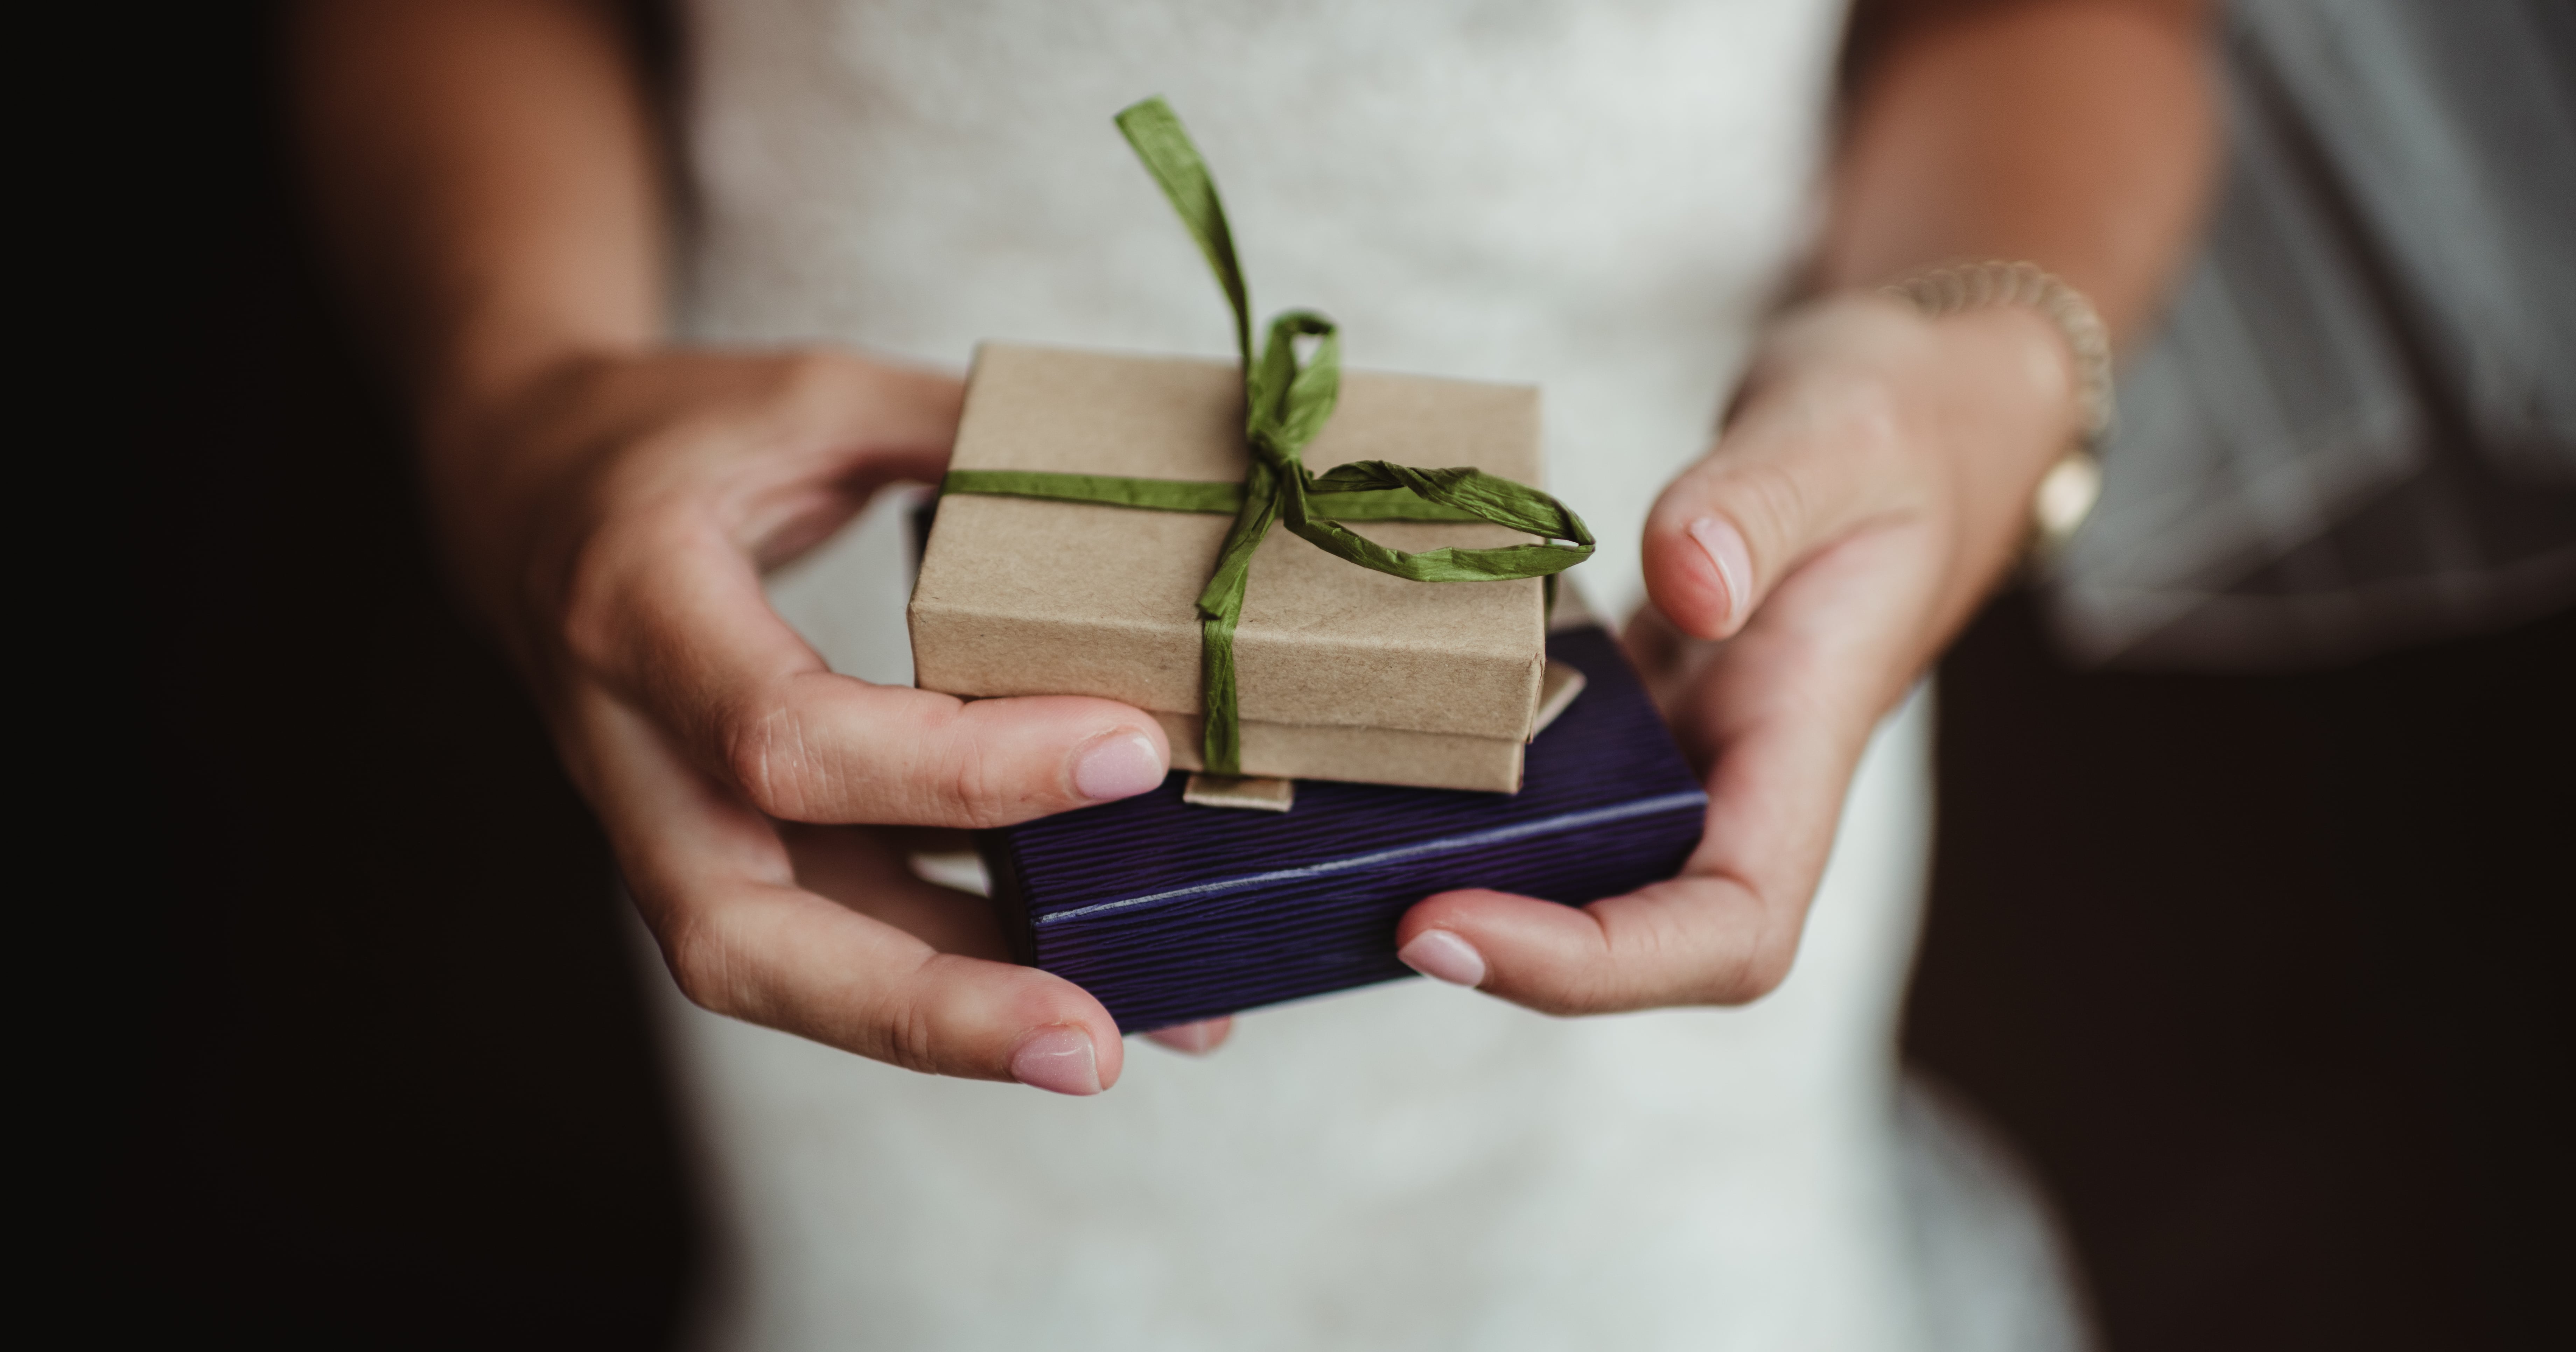 9 Amazon Wedding Gifts That Are Thoughtful and Affordable